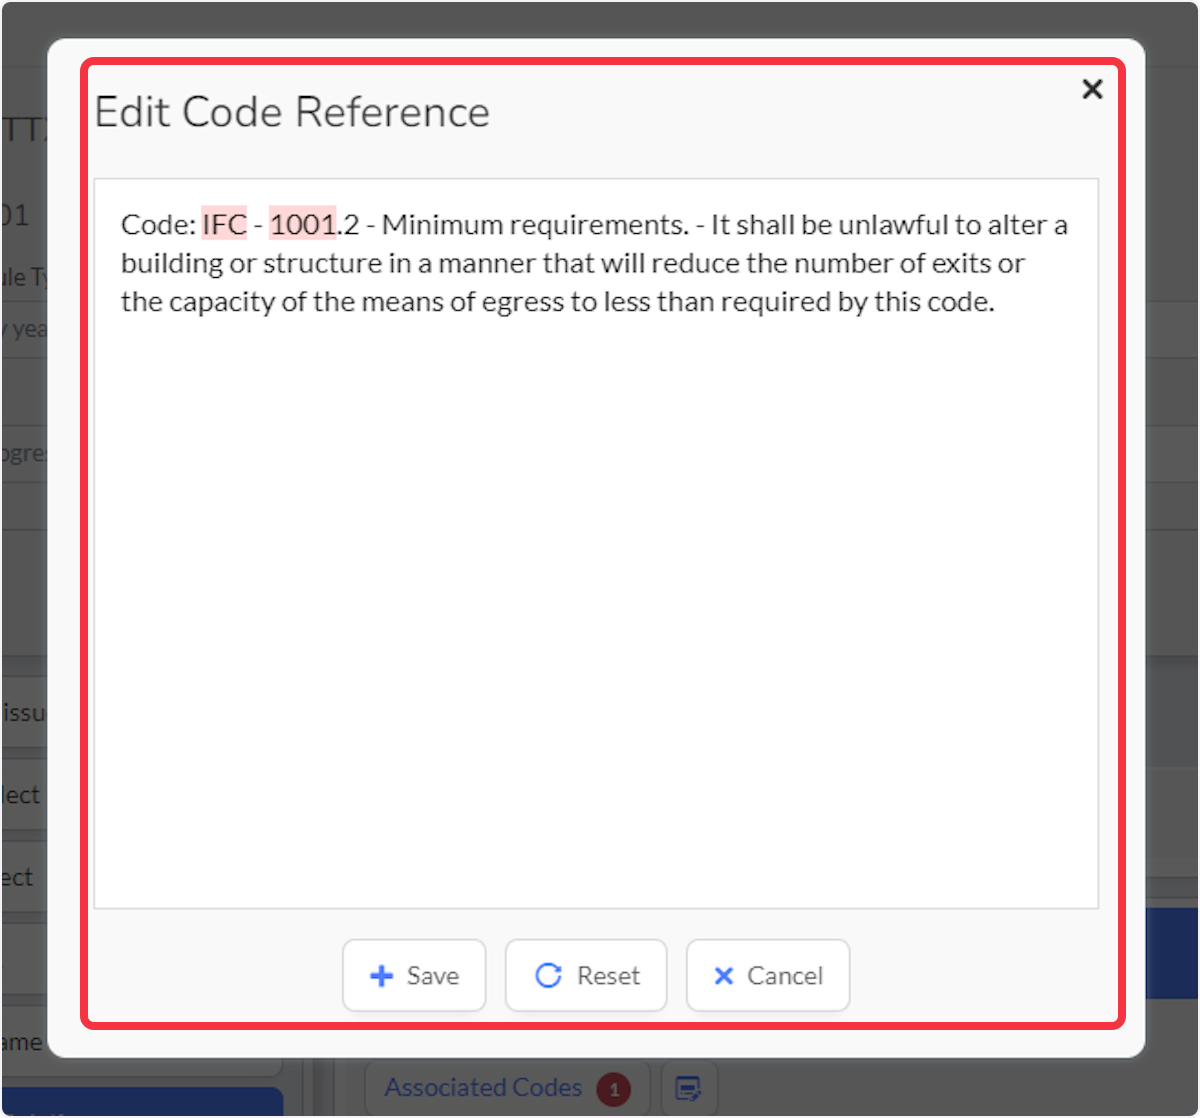 Dialog window for editing the Associated Code Reference.  Select Save, Reset, or Cancel when done.